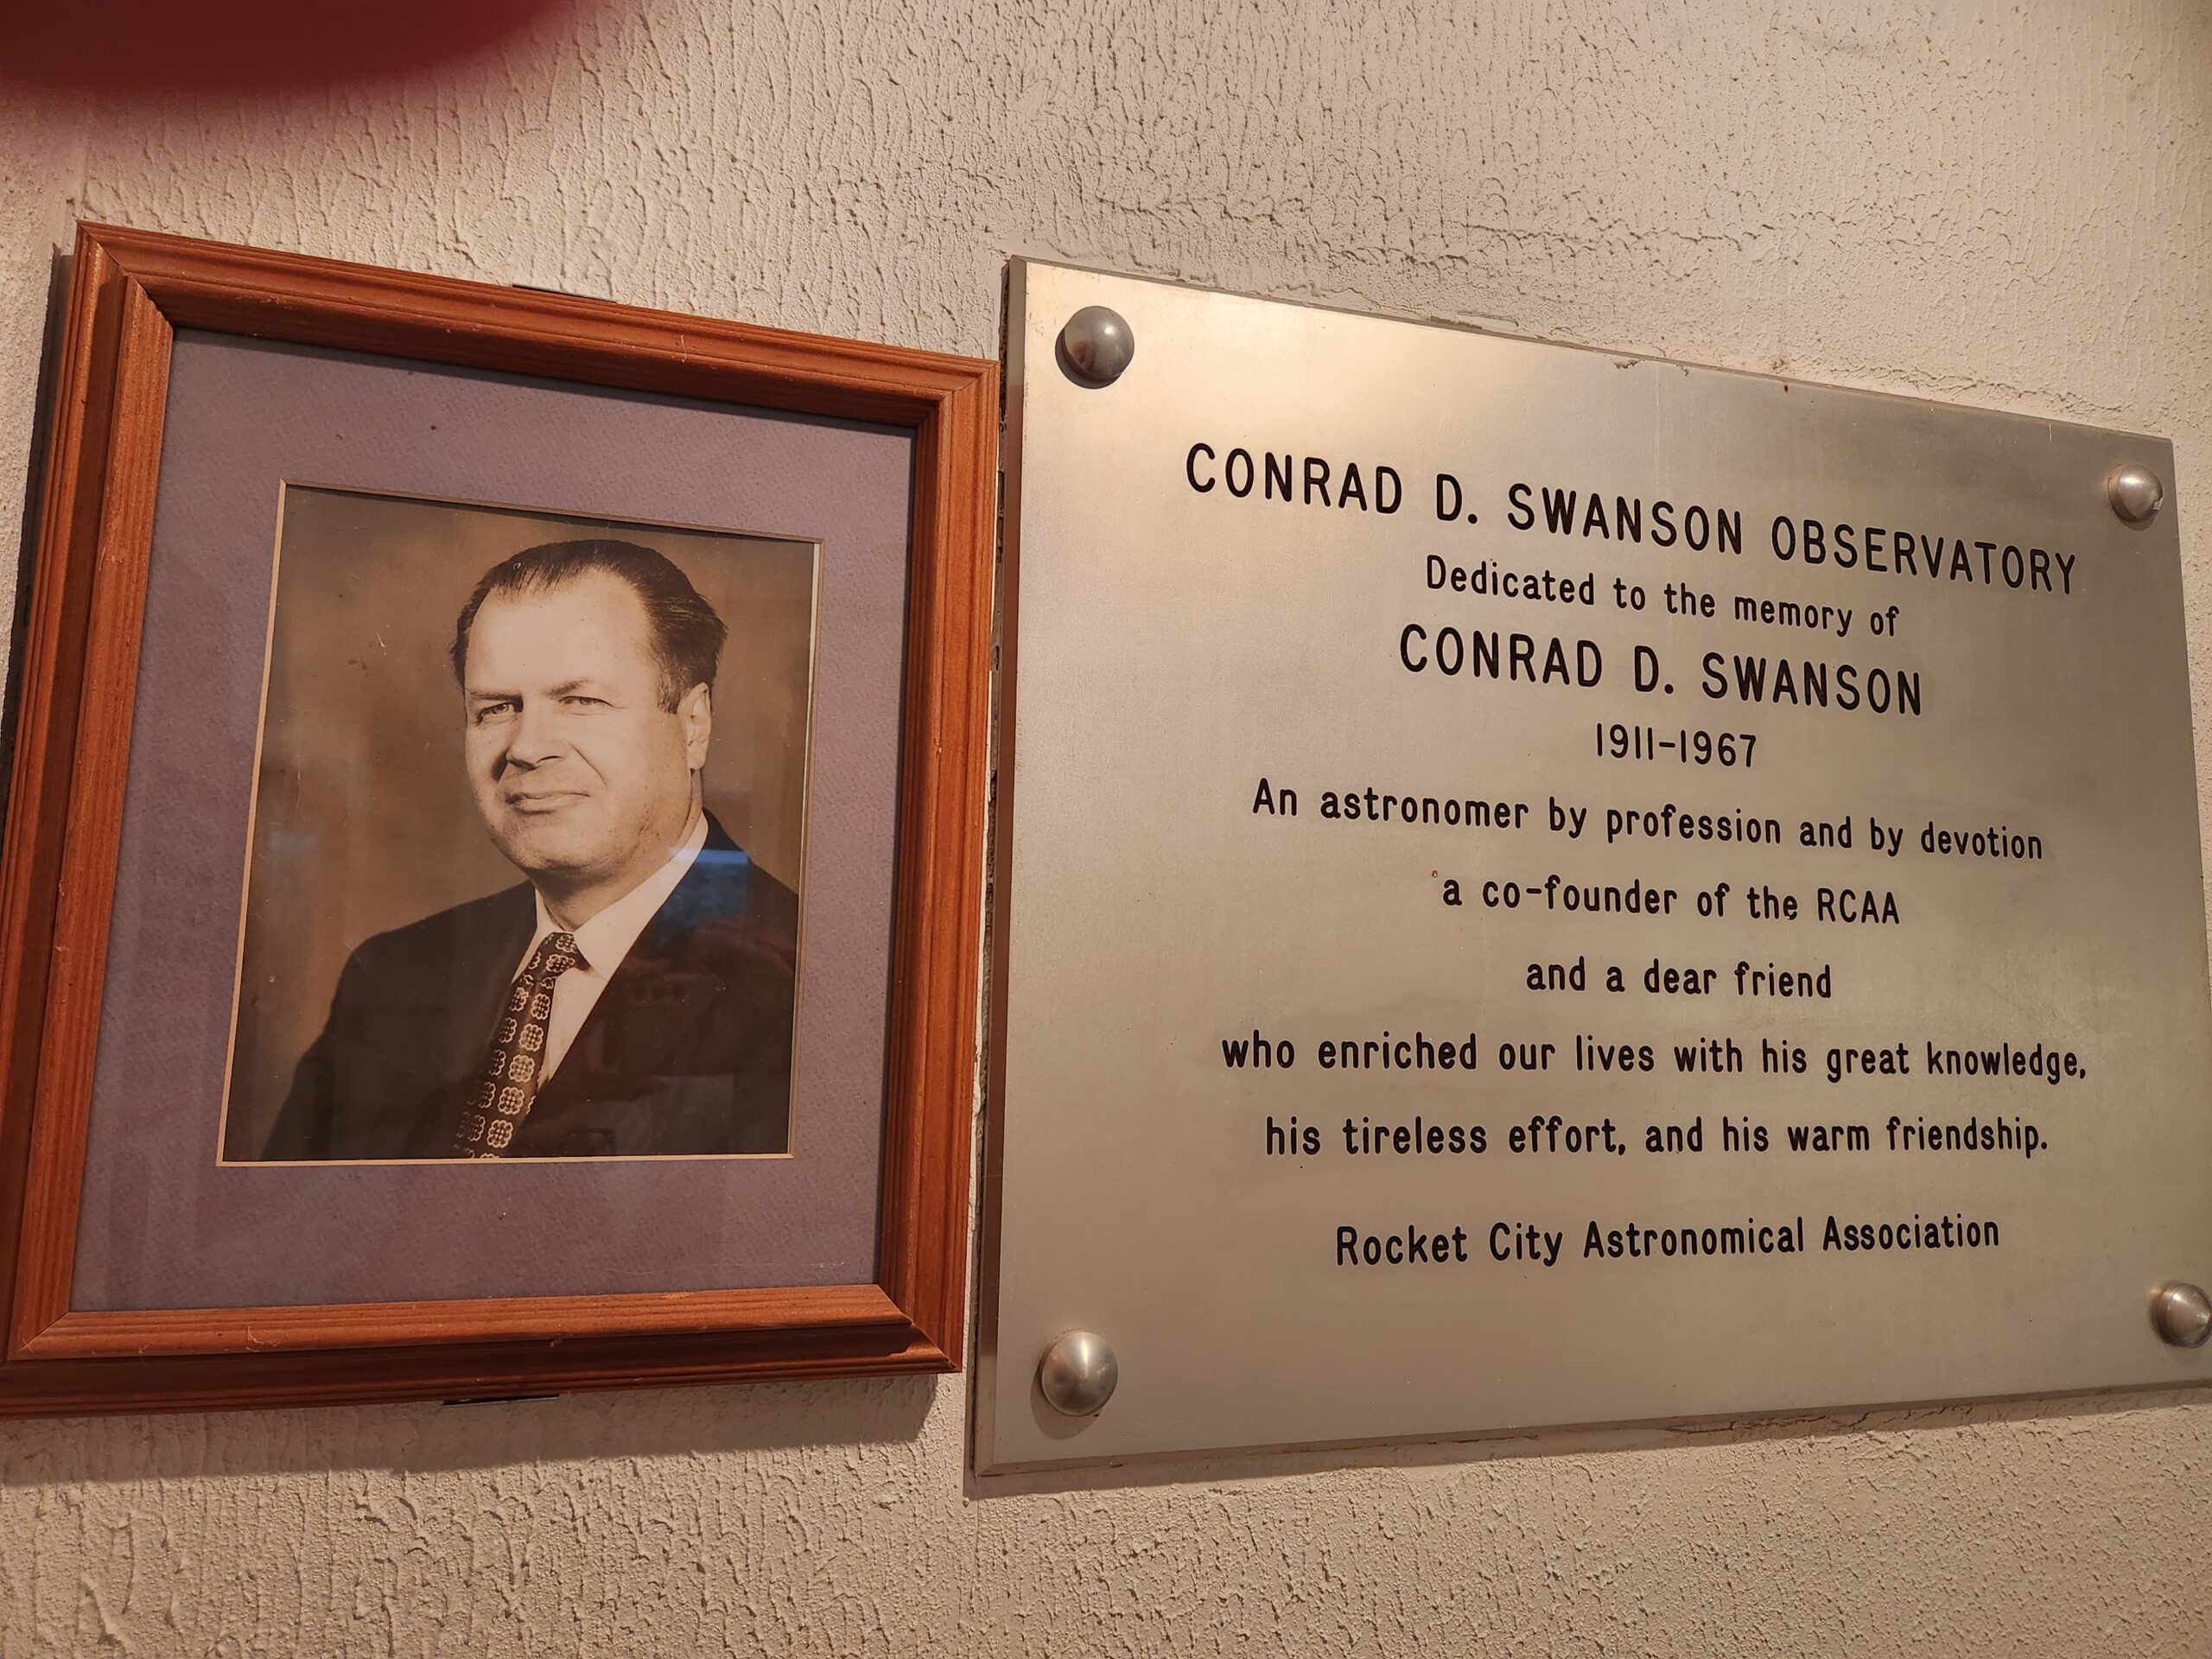 Photograph and plaque inside Swanson Observatory commemorating Conrad D. Swanson